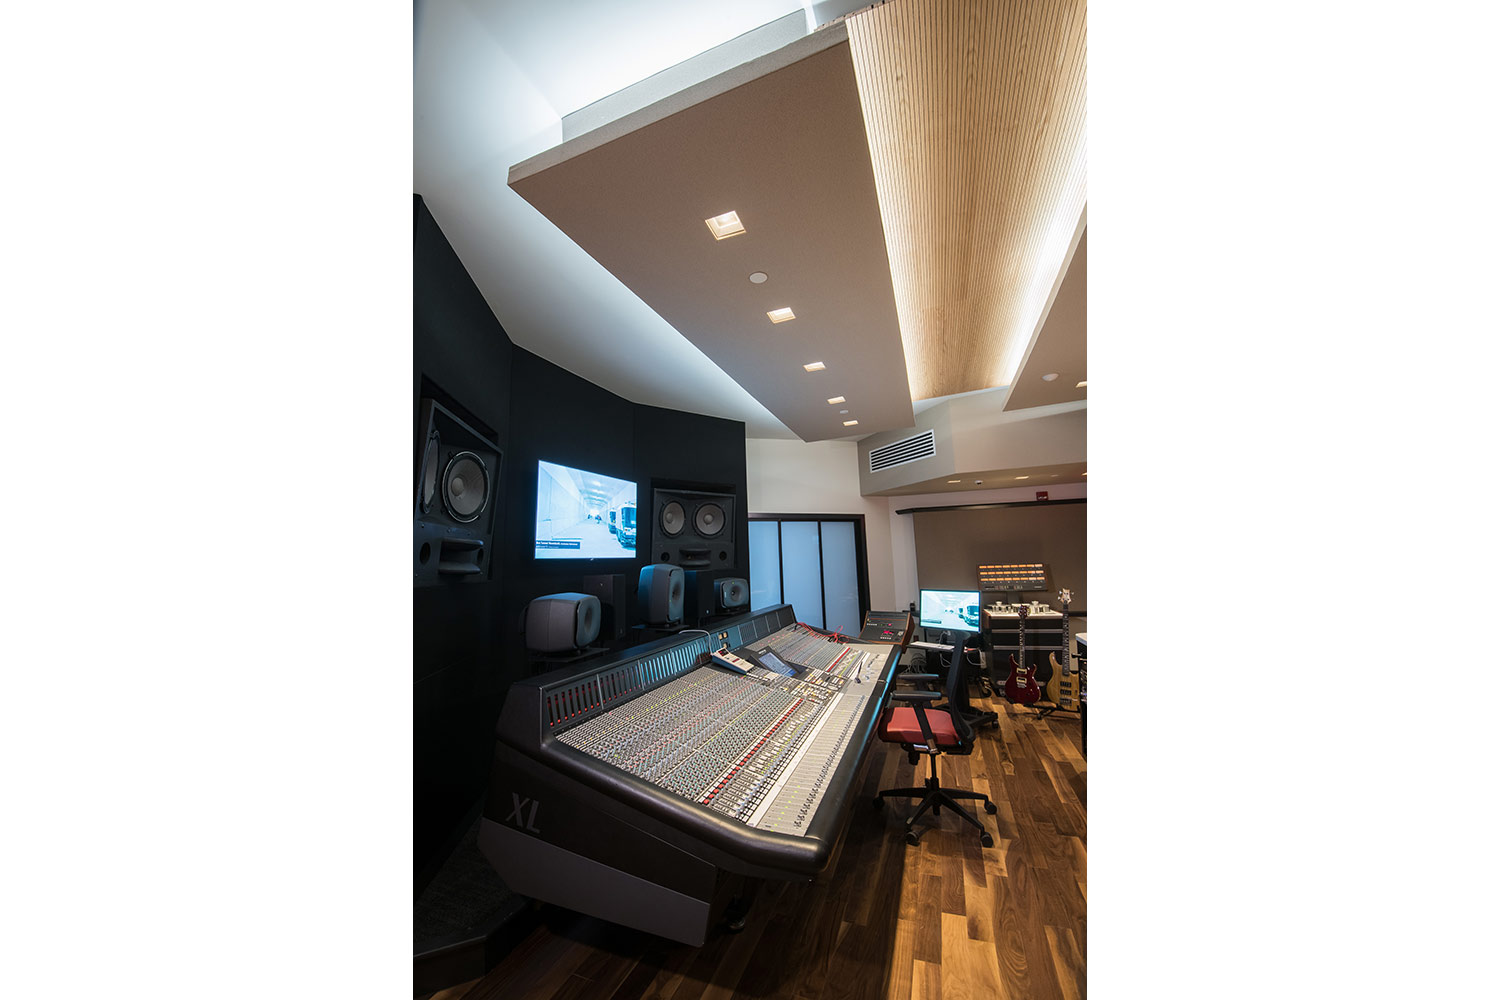 Montgomery County Community College in Blue Bell, PA brand-new Recording Studio for their Digital Music Technology course. Designed by WSDG. Architectural acoustics and media systems engineering. Control Room vertical view.